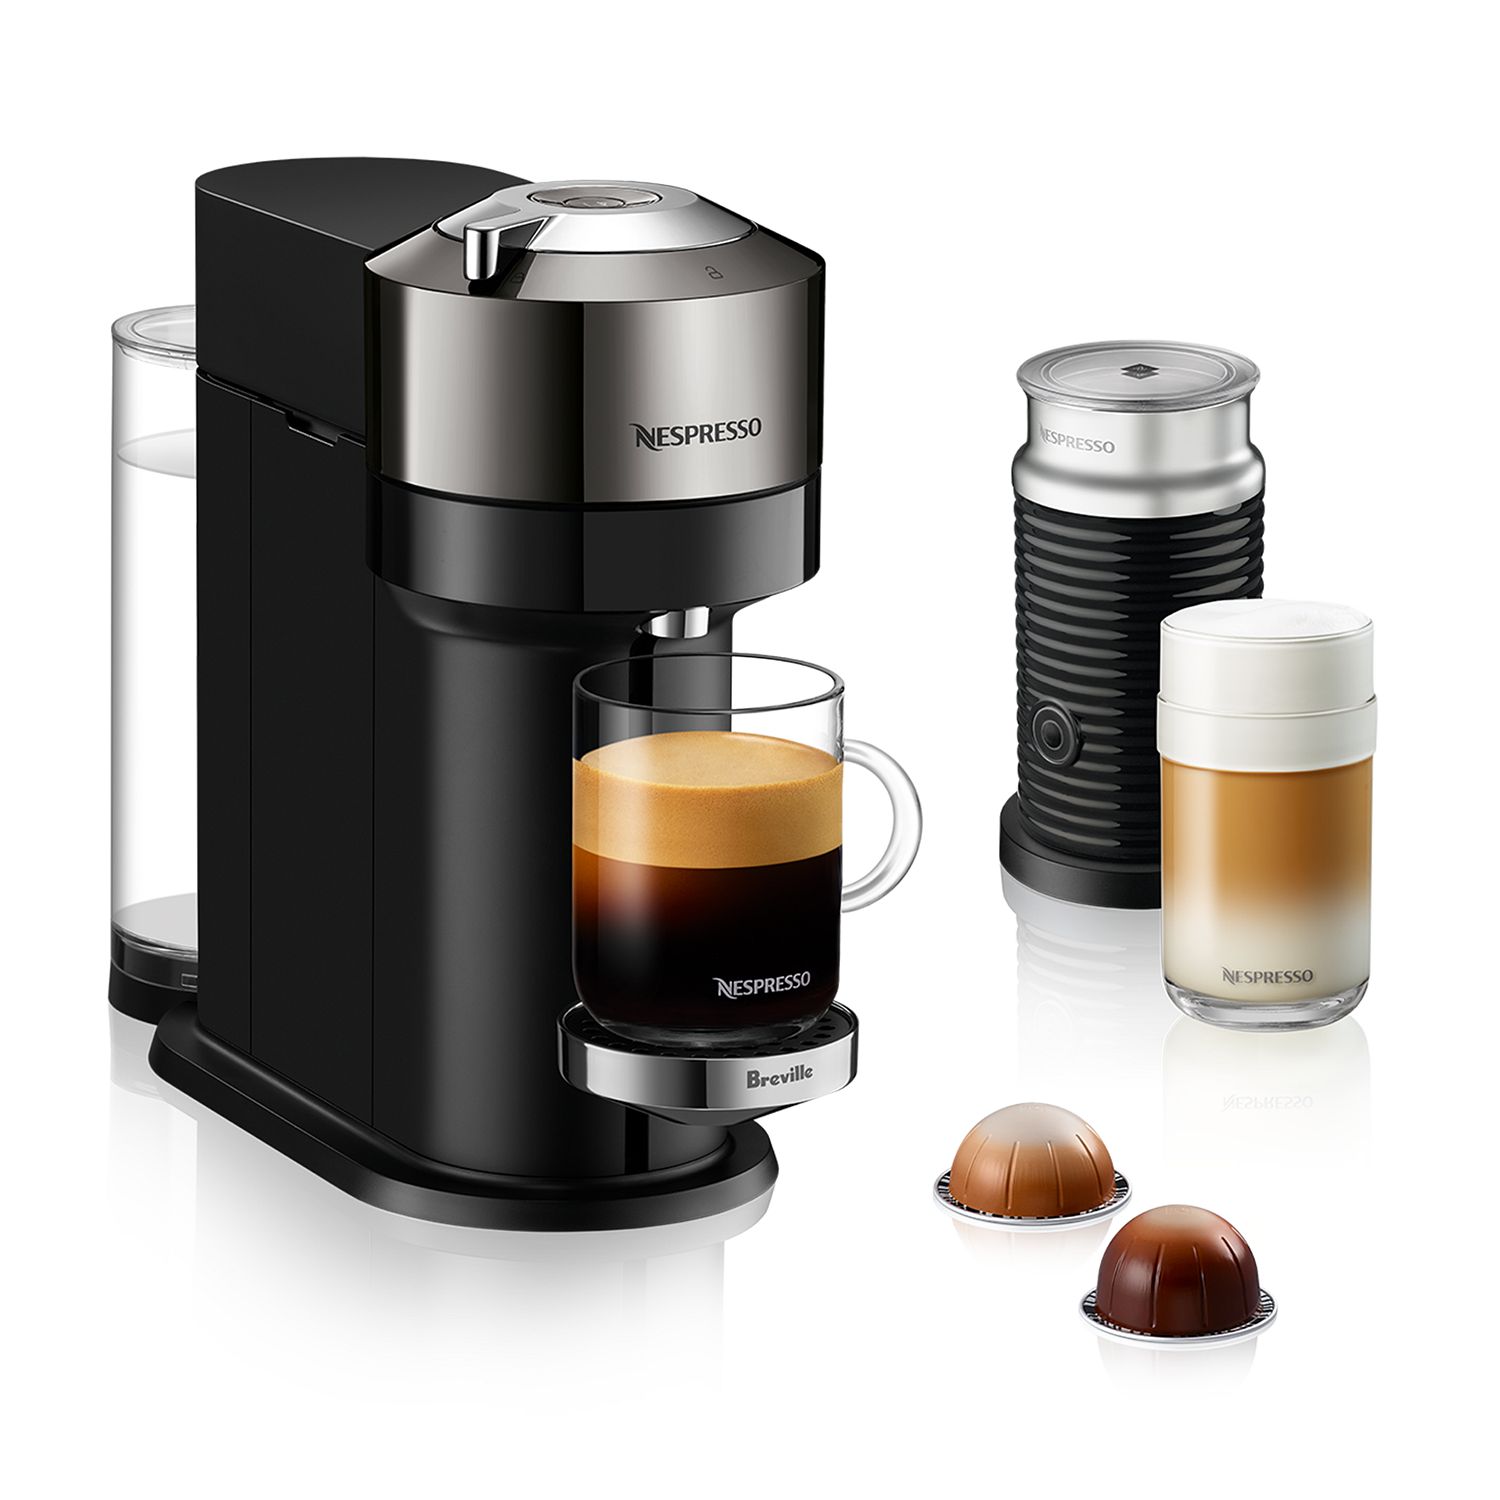 Nespresso Vertuo Next Deluxe by Breville with Aeroccino Milk Frother (Dark Chrome) $127.99 at Bloomingdale's